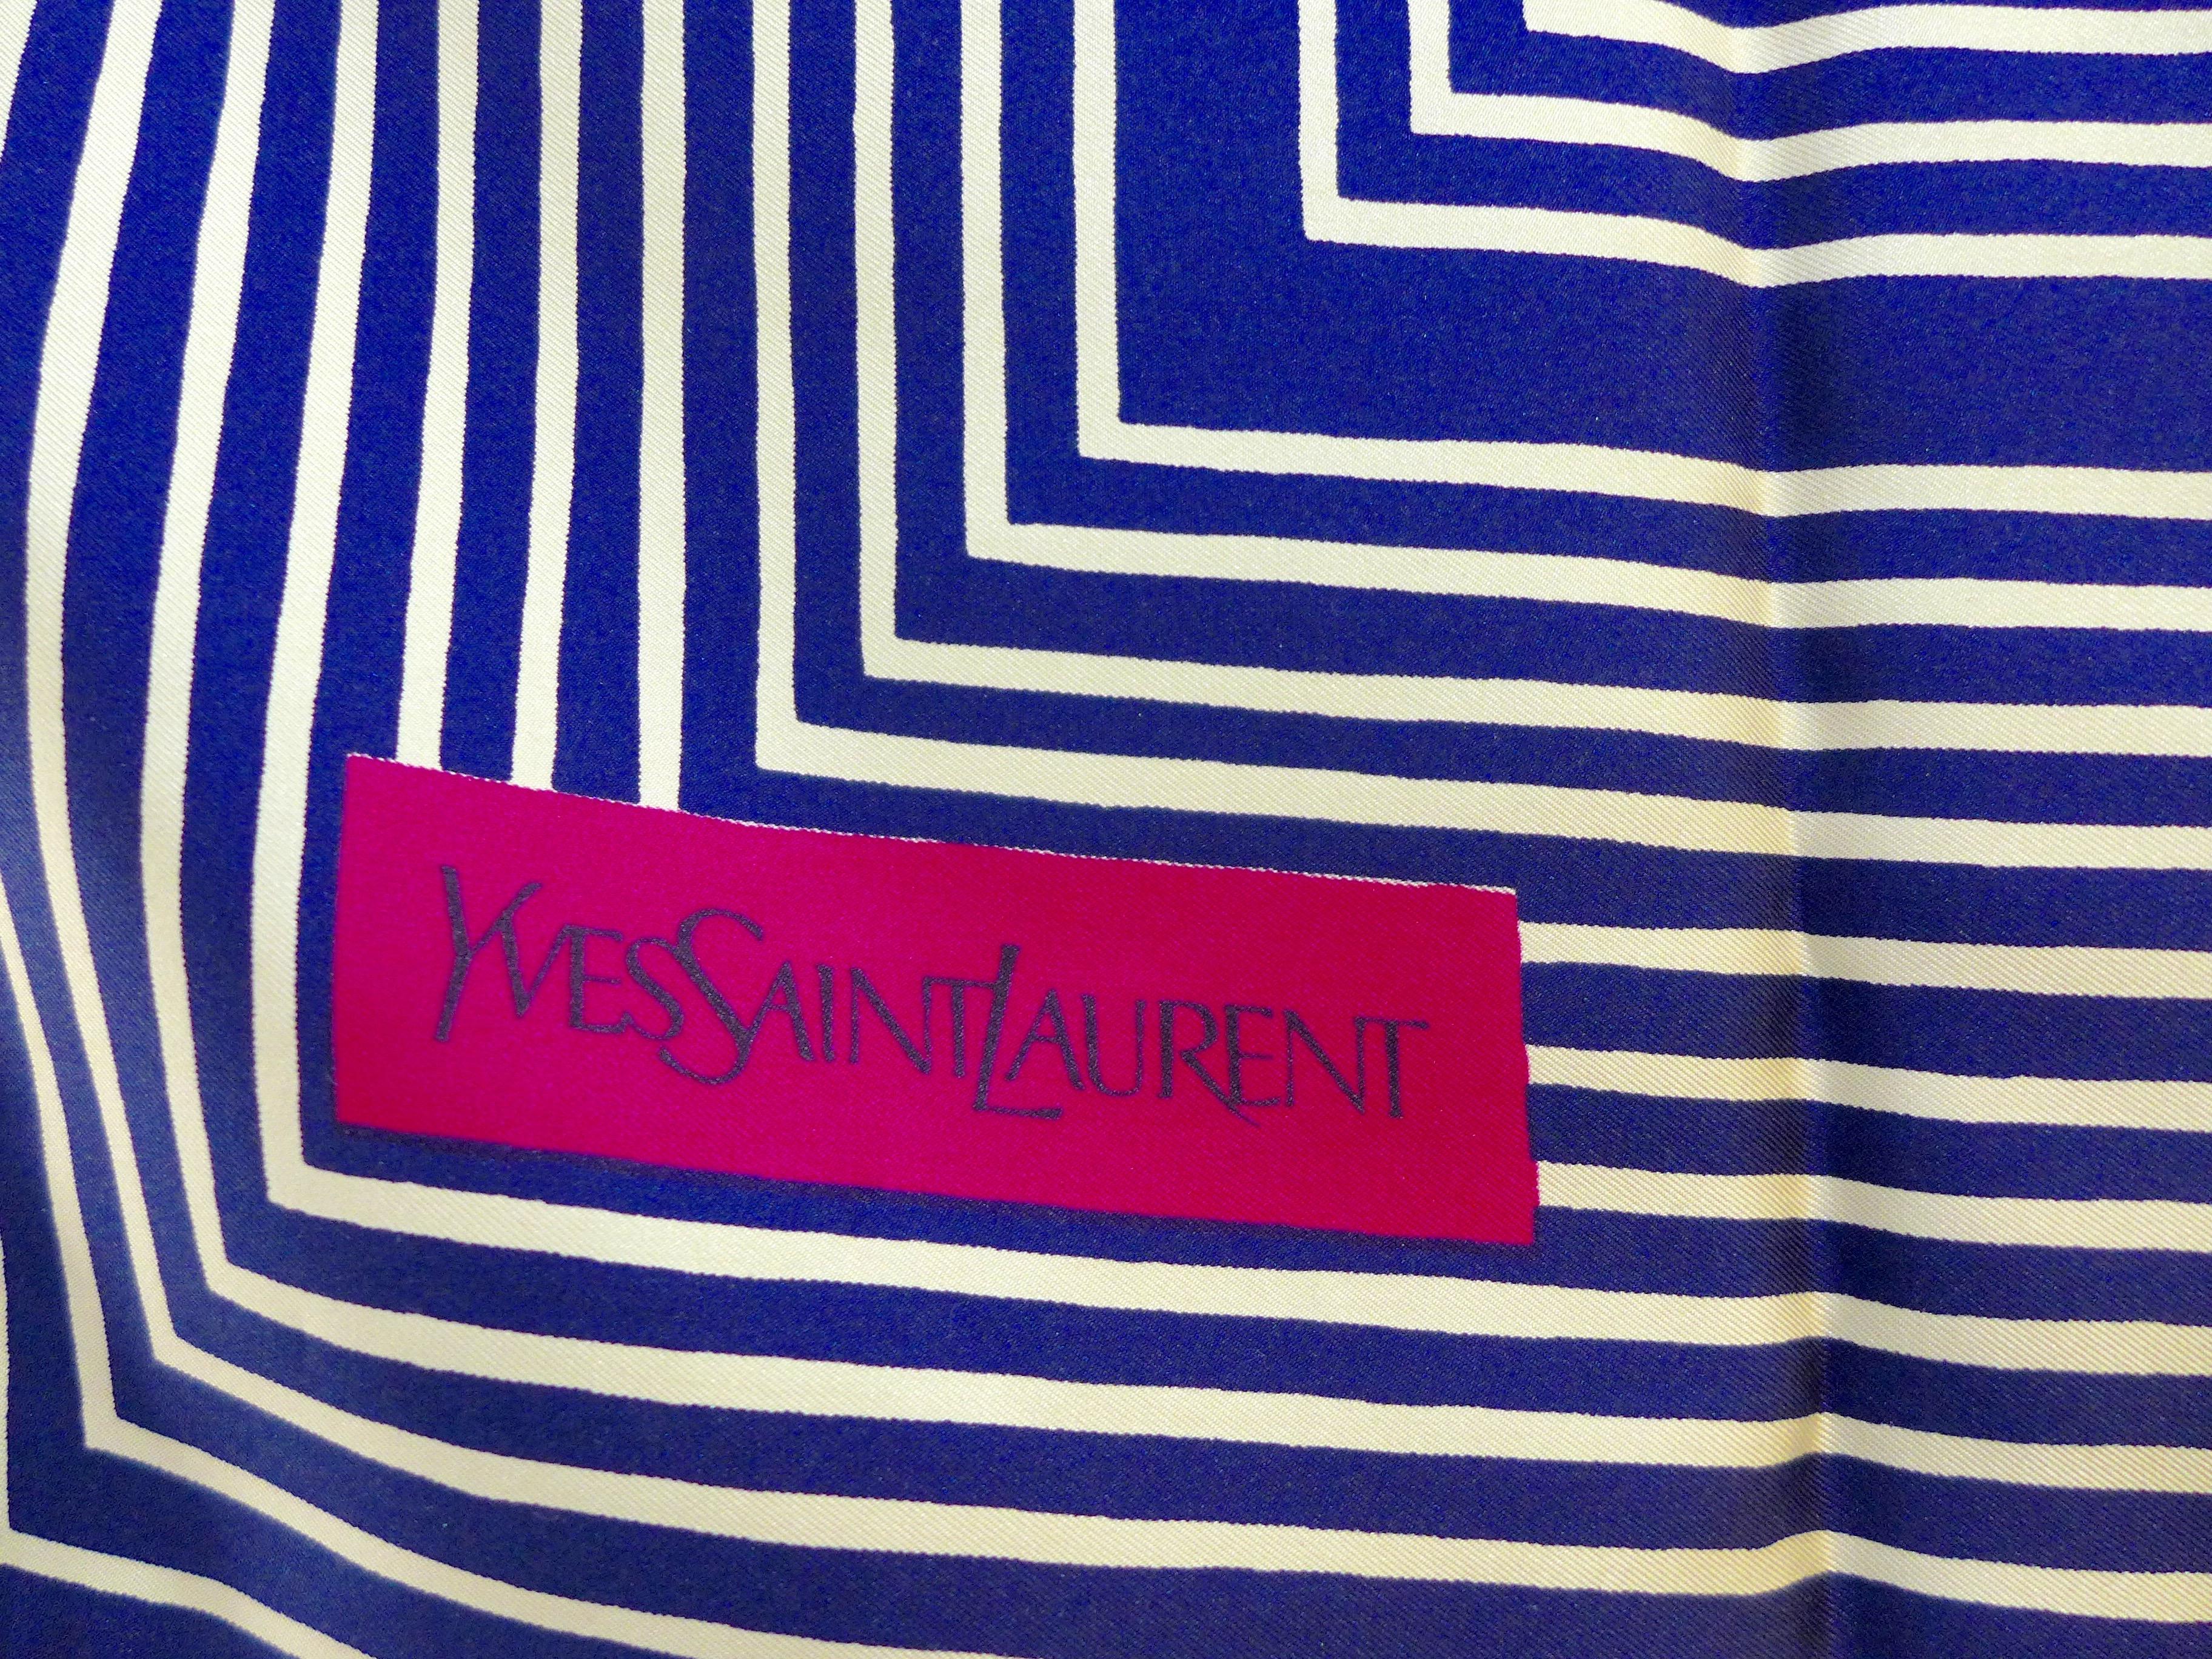 Made in France of pure silk and finished by hand with finely rolled hand-stitched edges, this eye-catching YSL scarf is 35